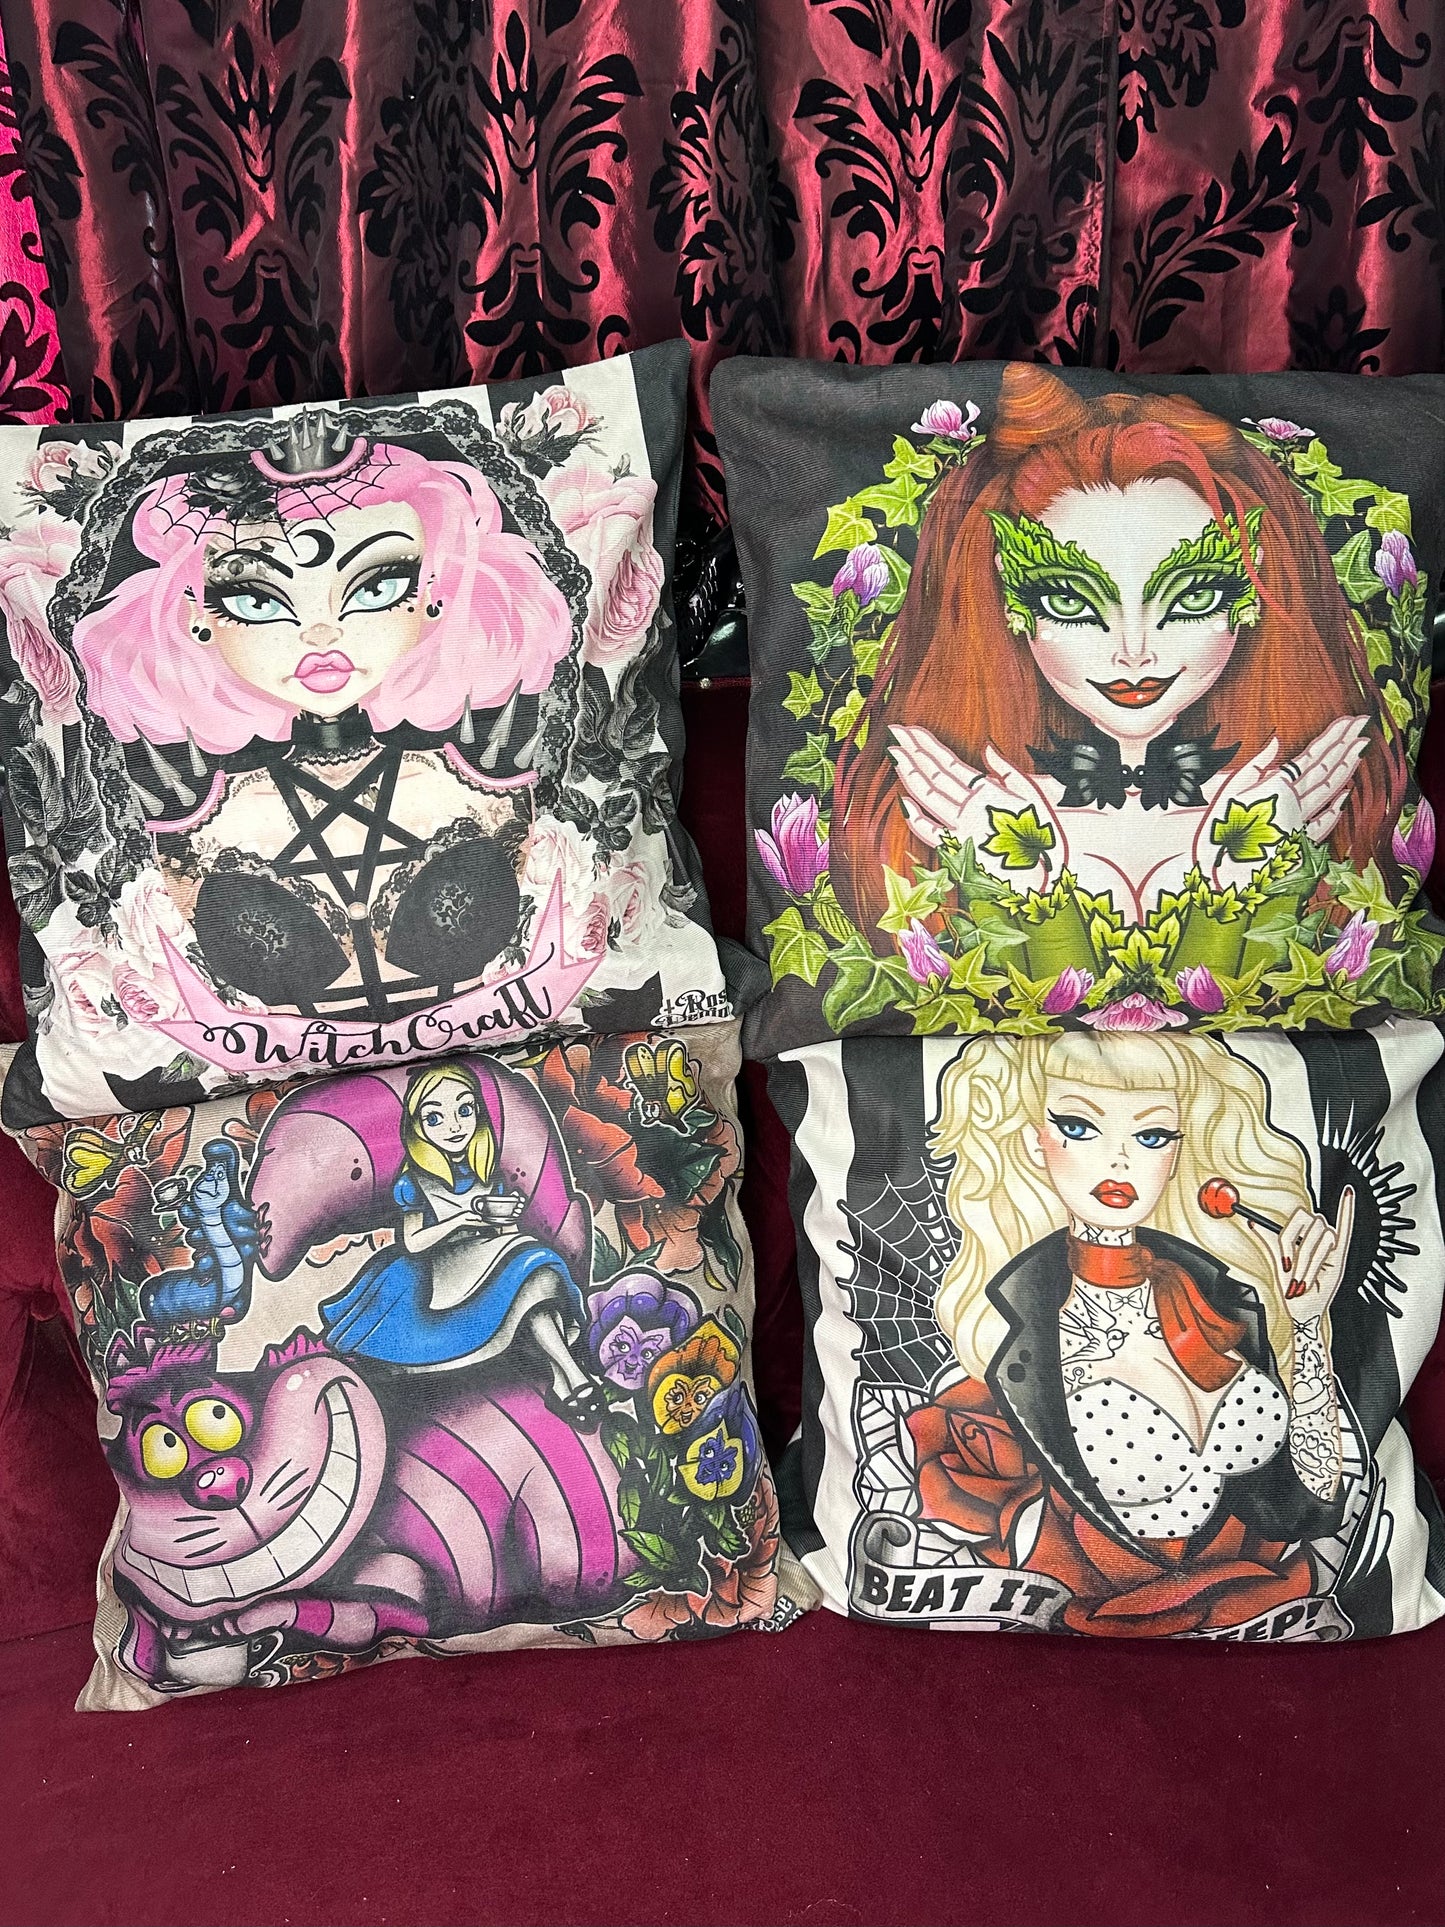 THE POISONOUS ONE - Rose Demon Cushion Cover